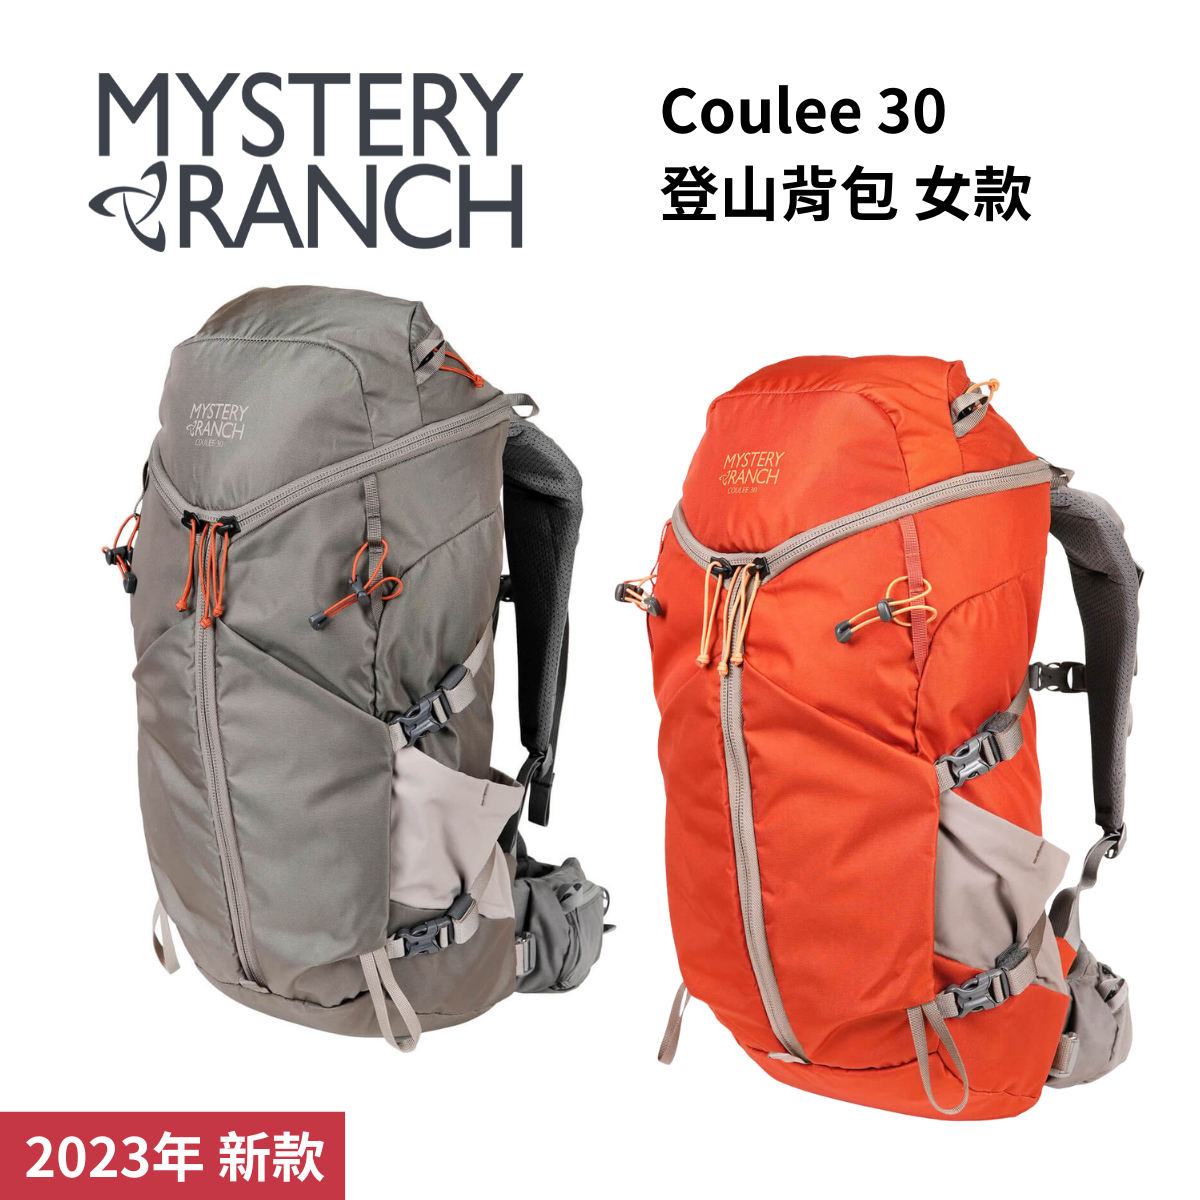 【Mystery Ranch】Coulee 30 登山背包 女款